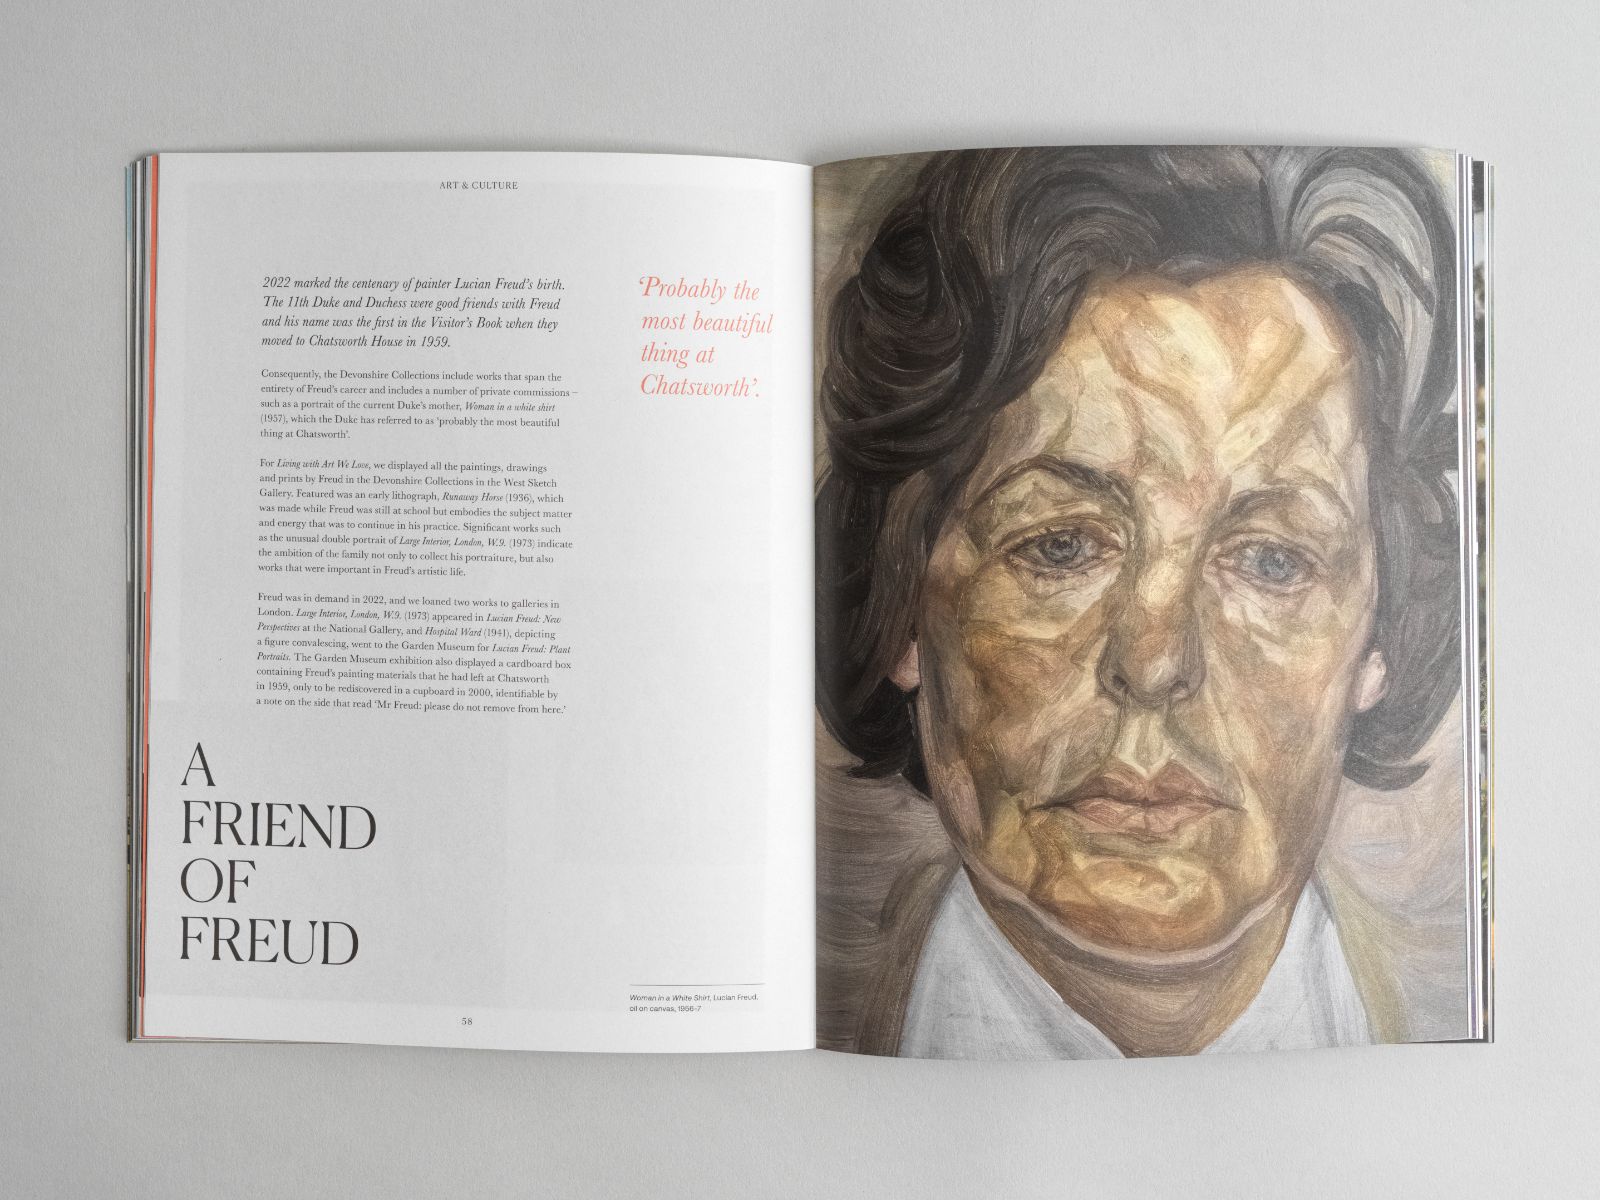 A FRIEND OF FREUD. Lucien Freud painting of Deborah Devonshire. ‘Probably the Most Beautiful thing at Chatsworth’